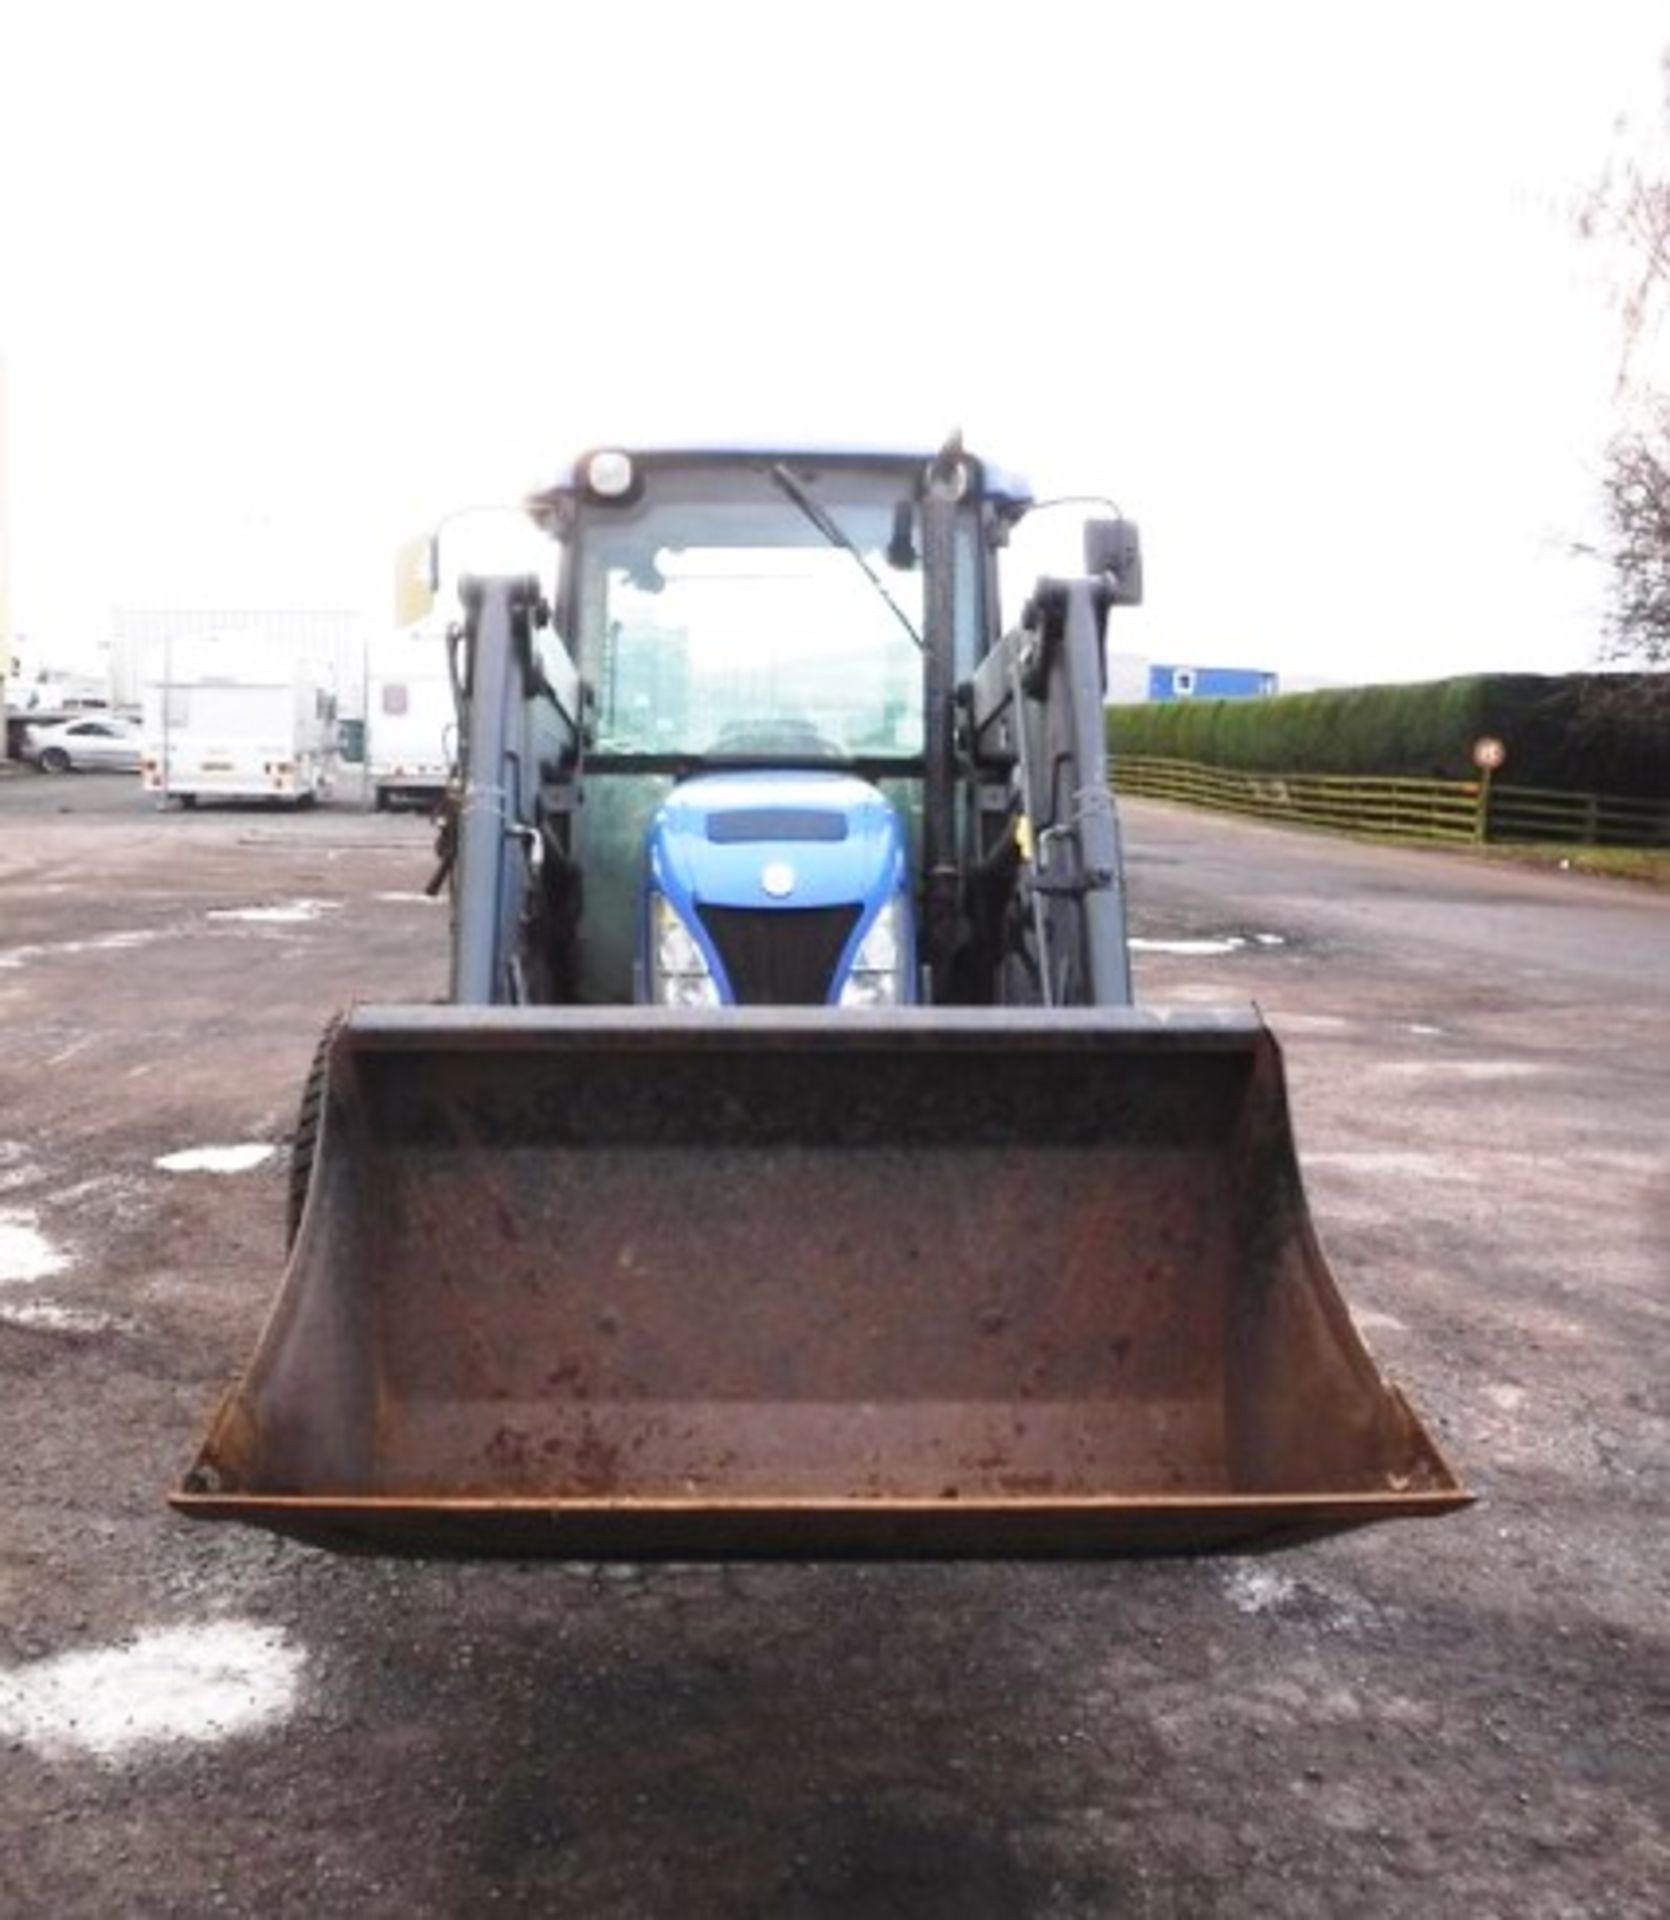 2008 NEW HOLLAND TN60 TRACTOR. REG NO SP08 DWY. SN 111054. GVW(TONNES) 4497, 3062HRS (NOT VERIFIED) - Image 34 of 40